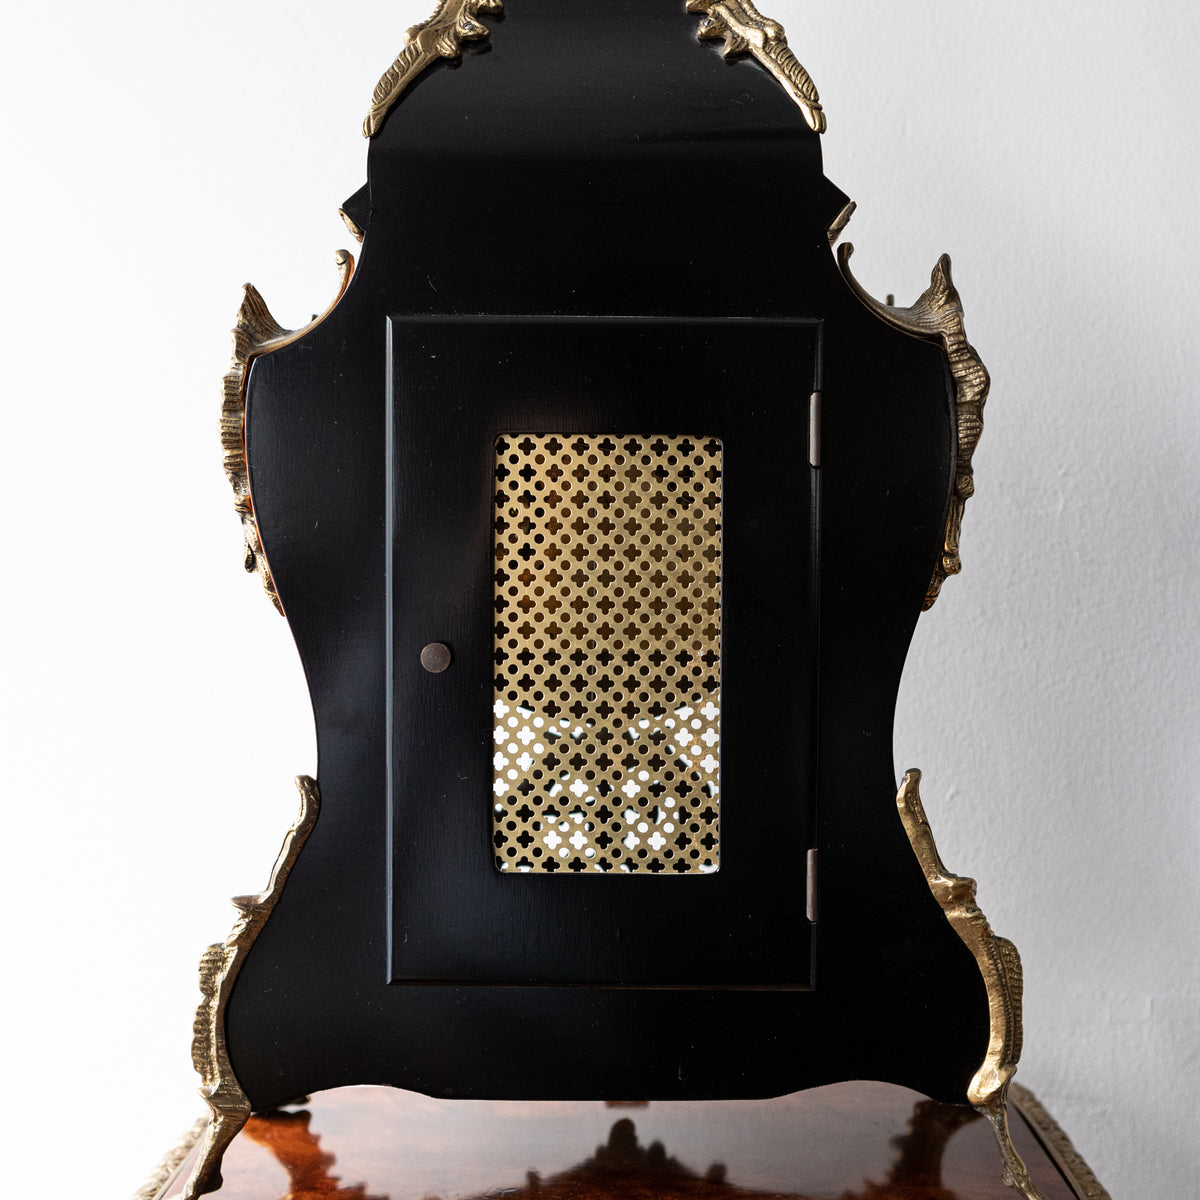 Reclaimed Regency Style FHS Ornate Boulle Clock on Pedestal | The Architectural Forum